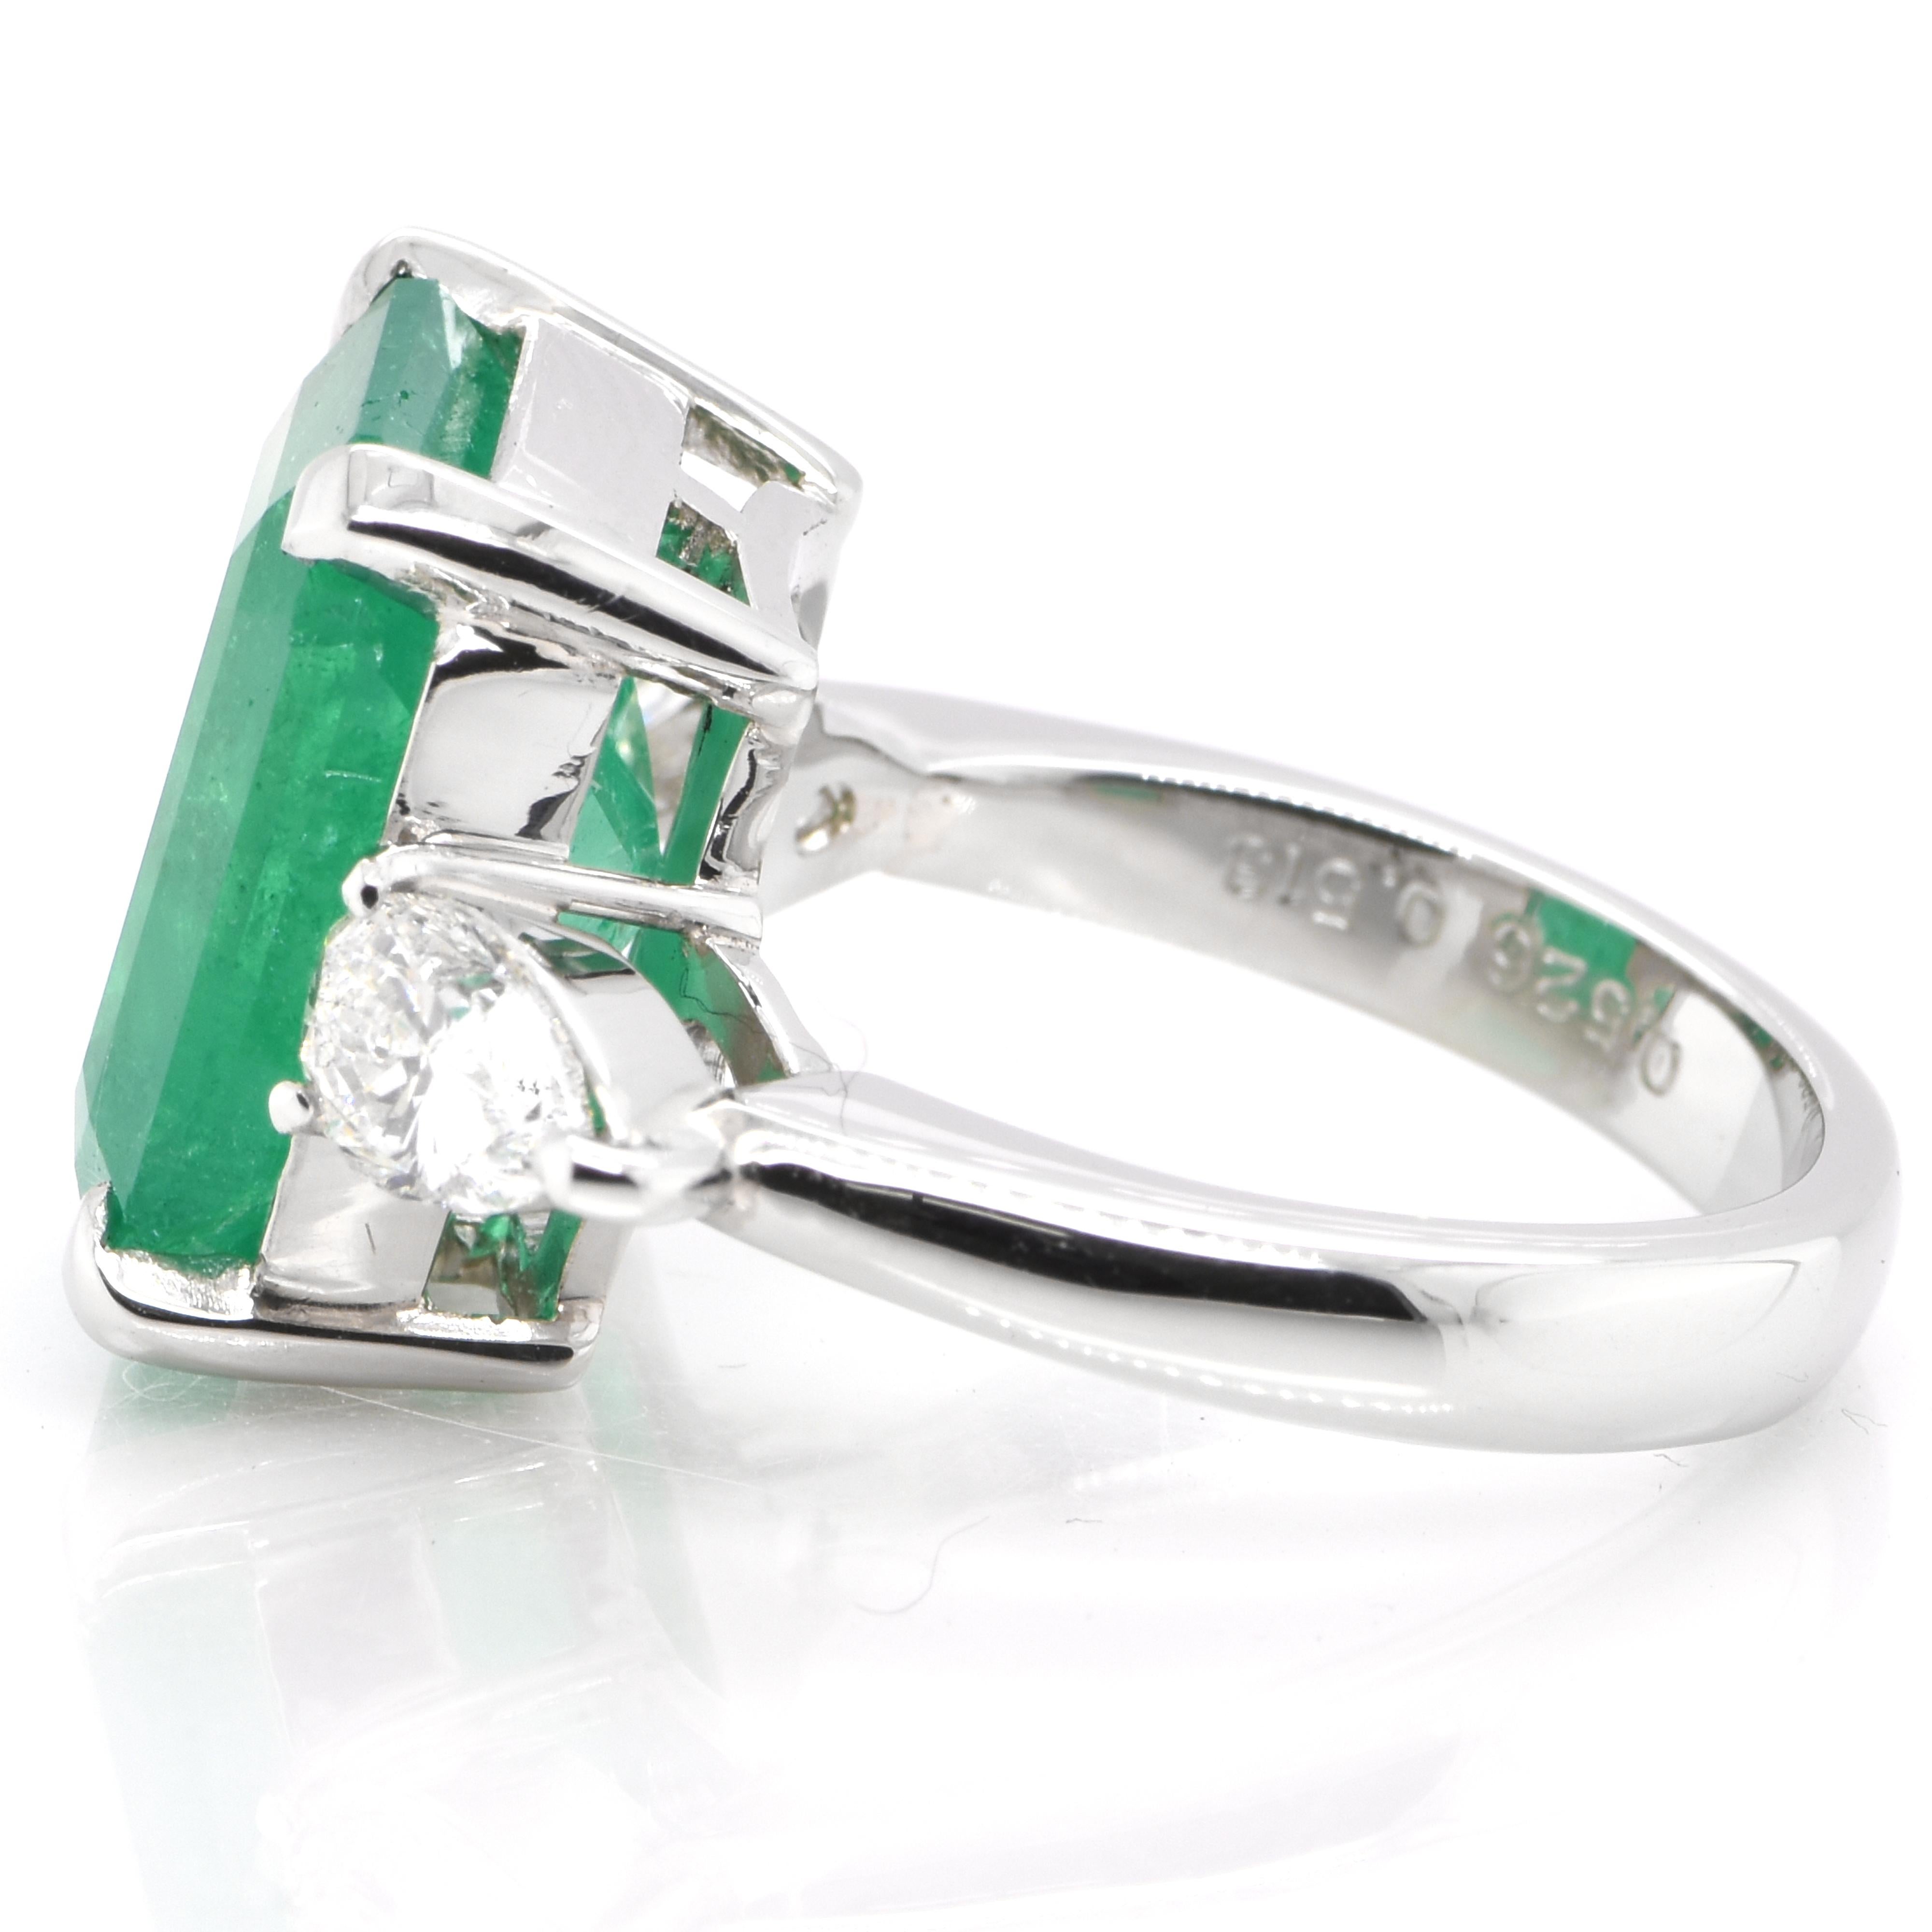 Emerald Cut 8.56 Carat Colombian Emerald and Diamond Cocktail Ring Set in Platinum For Sale